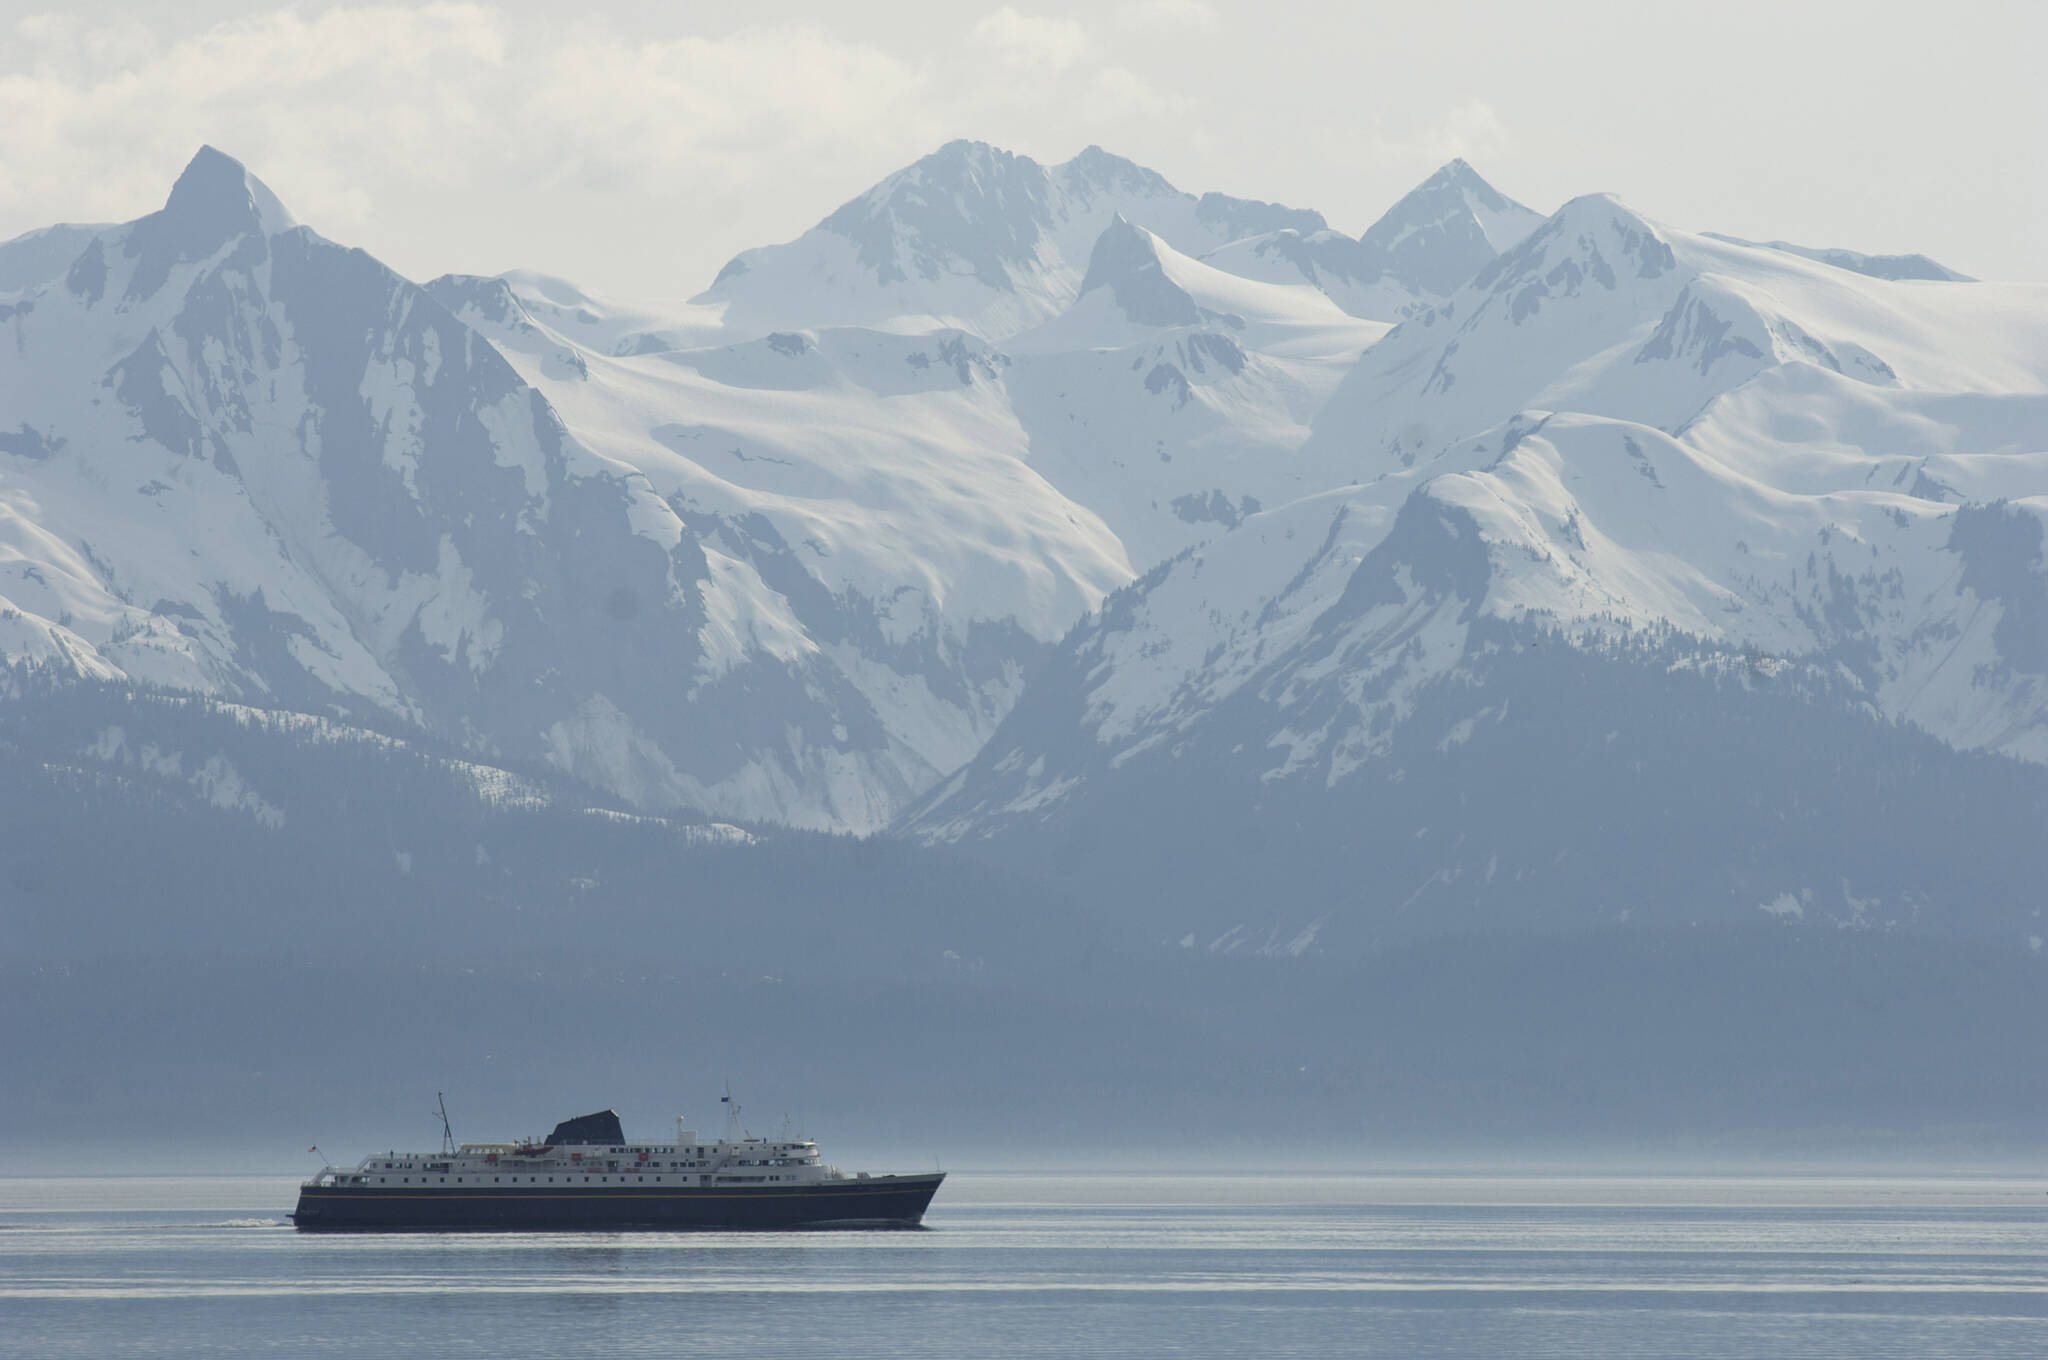 The Alaska Marine Highway ferry Malaspina heads up Lynn Canal towards Haines and Skagway from Juneau in 2008. (Juneau Empire File)